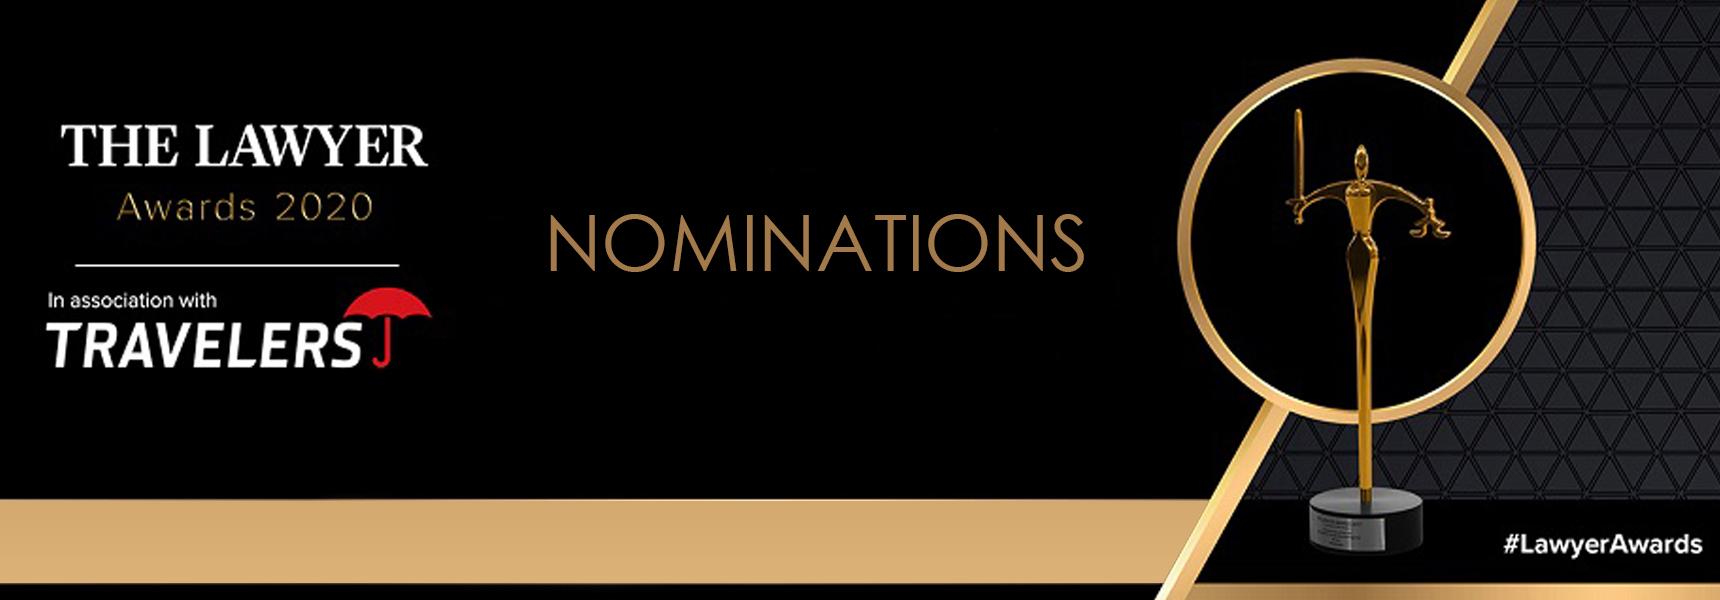 Cornerstone receives nomination for Senior Lawyer of the Year and In-house commerce and industry team of the year 